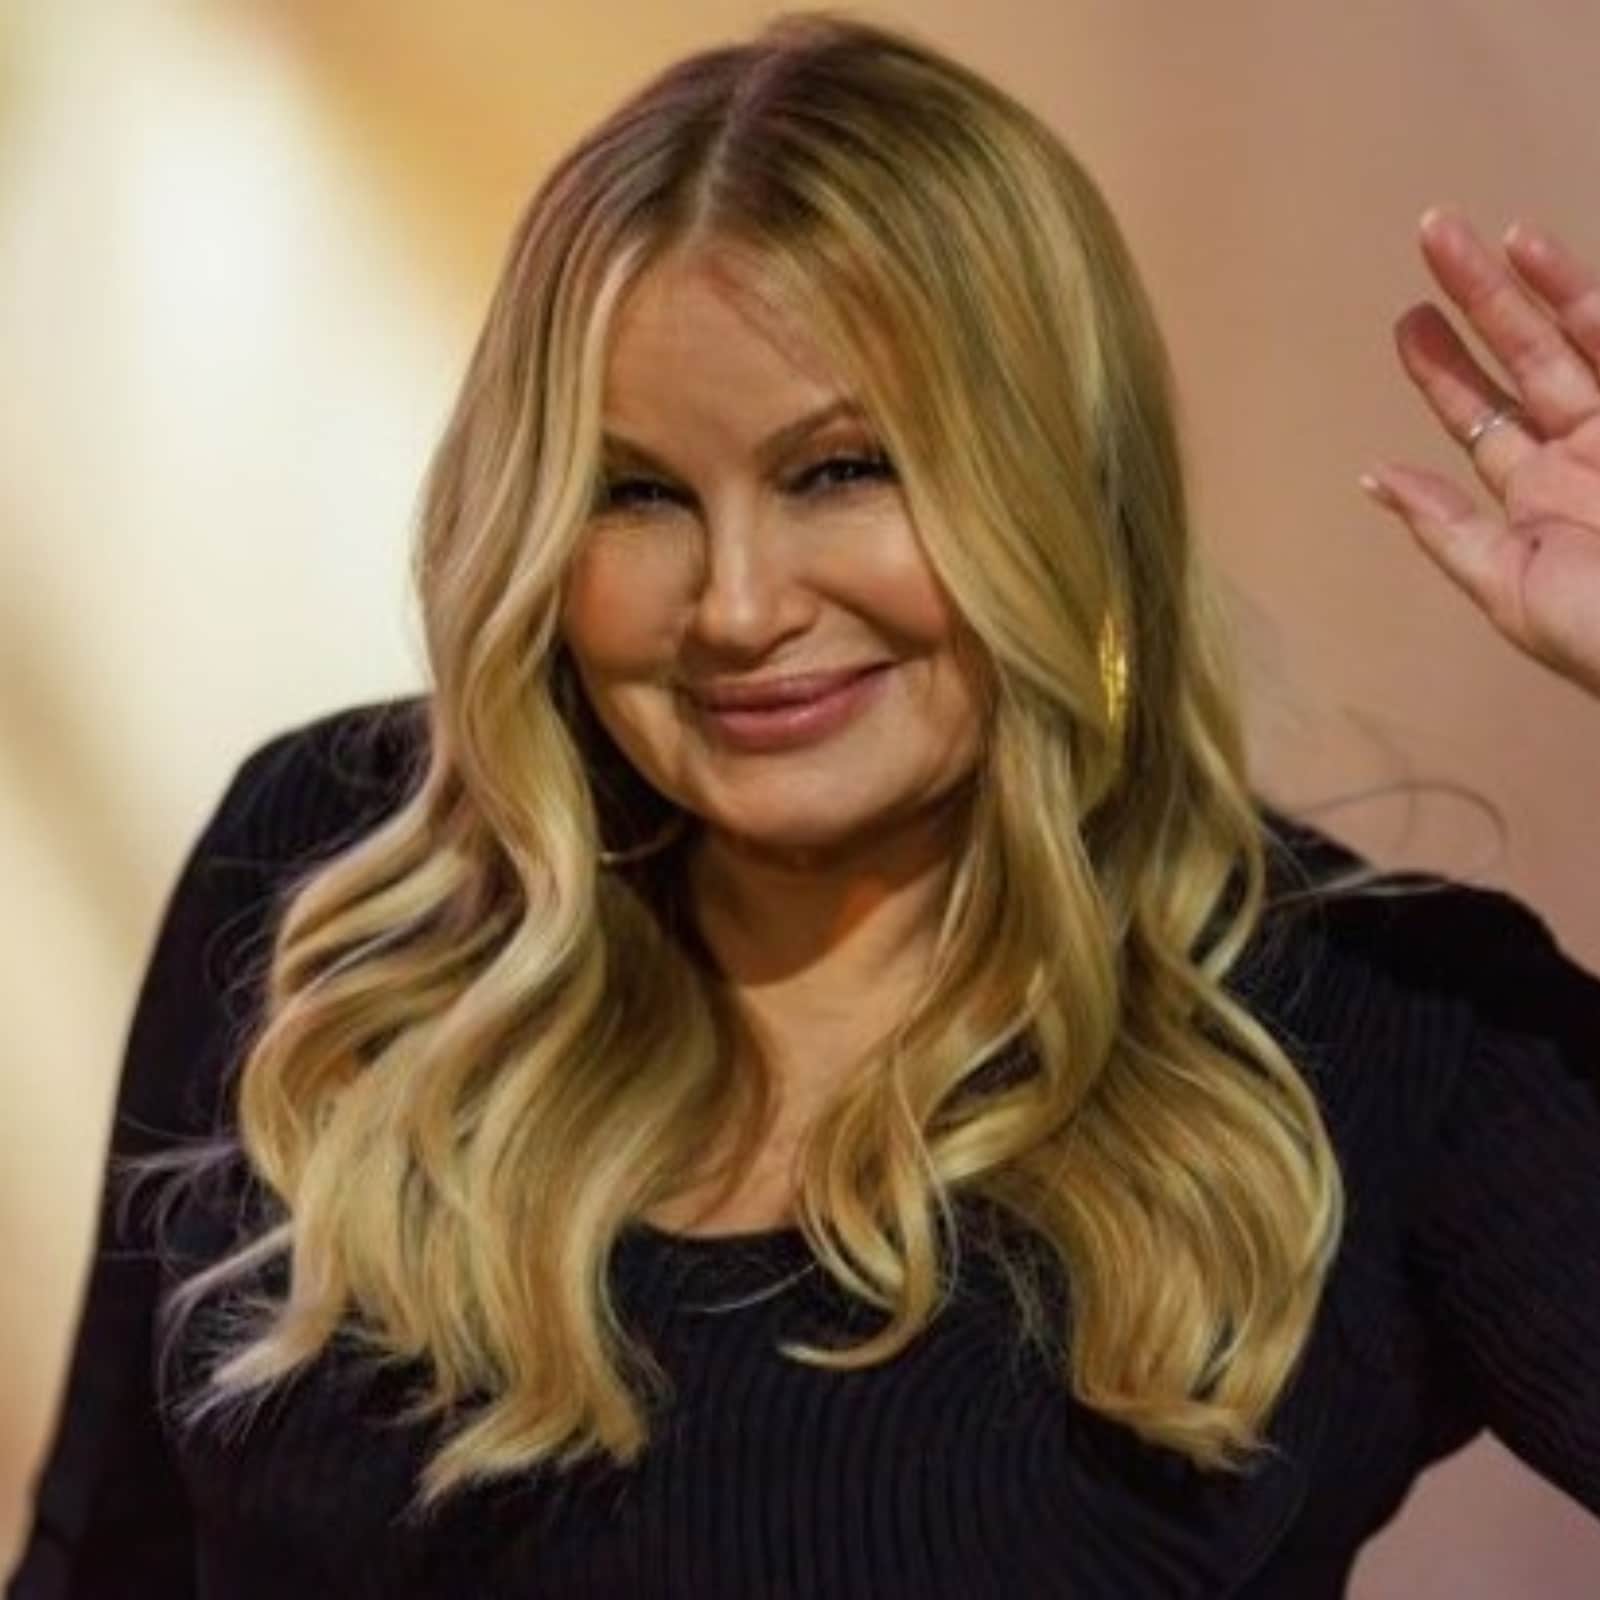 Xxx Sleeping Marathi - Jennifer Coolidge Admits To Sleeping With 200 People After American Pie:  'Got Lots Of Sexual Action' - News18